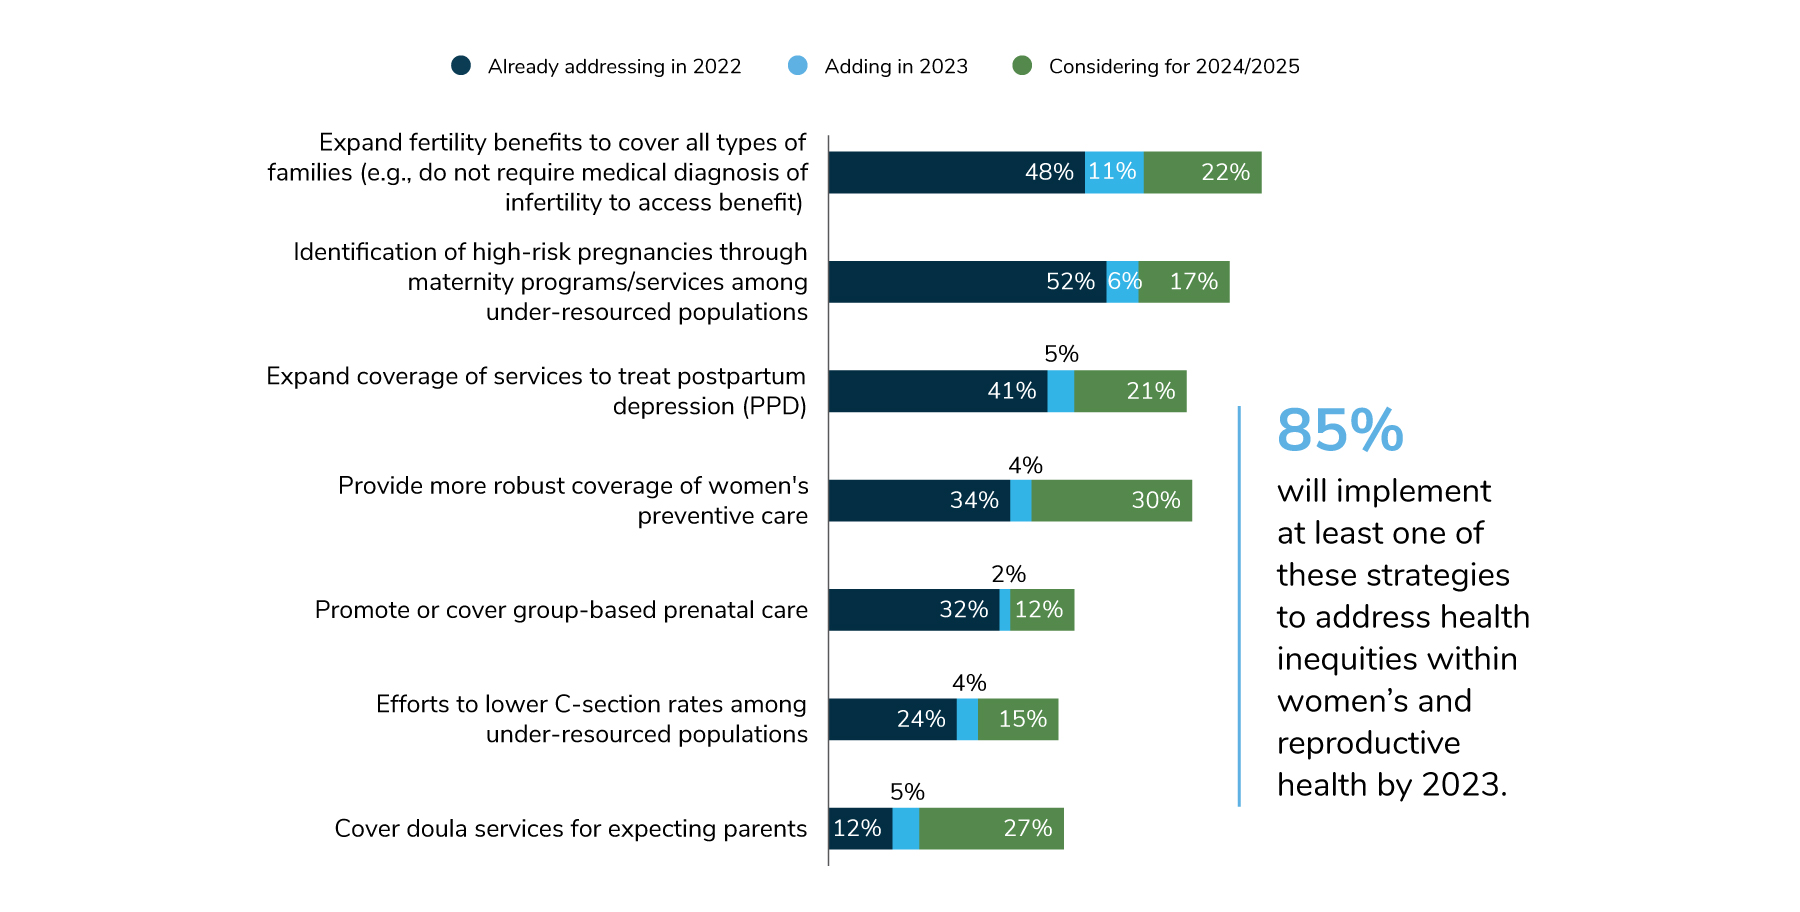 By 2023, employers will expand fertility benefits to cover all types of families (59%) and have programs to identify high-risk pregnancies among under-resourced populations (58%).